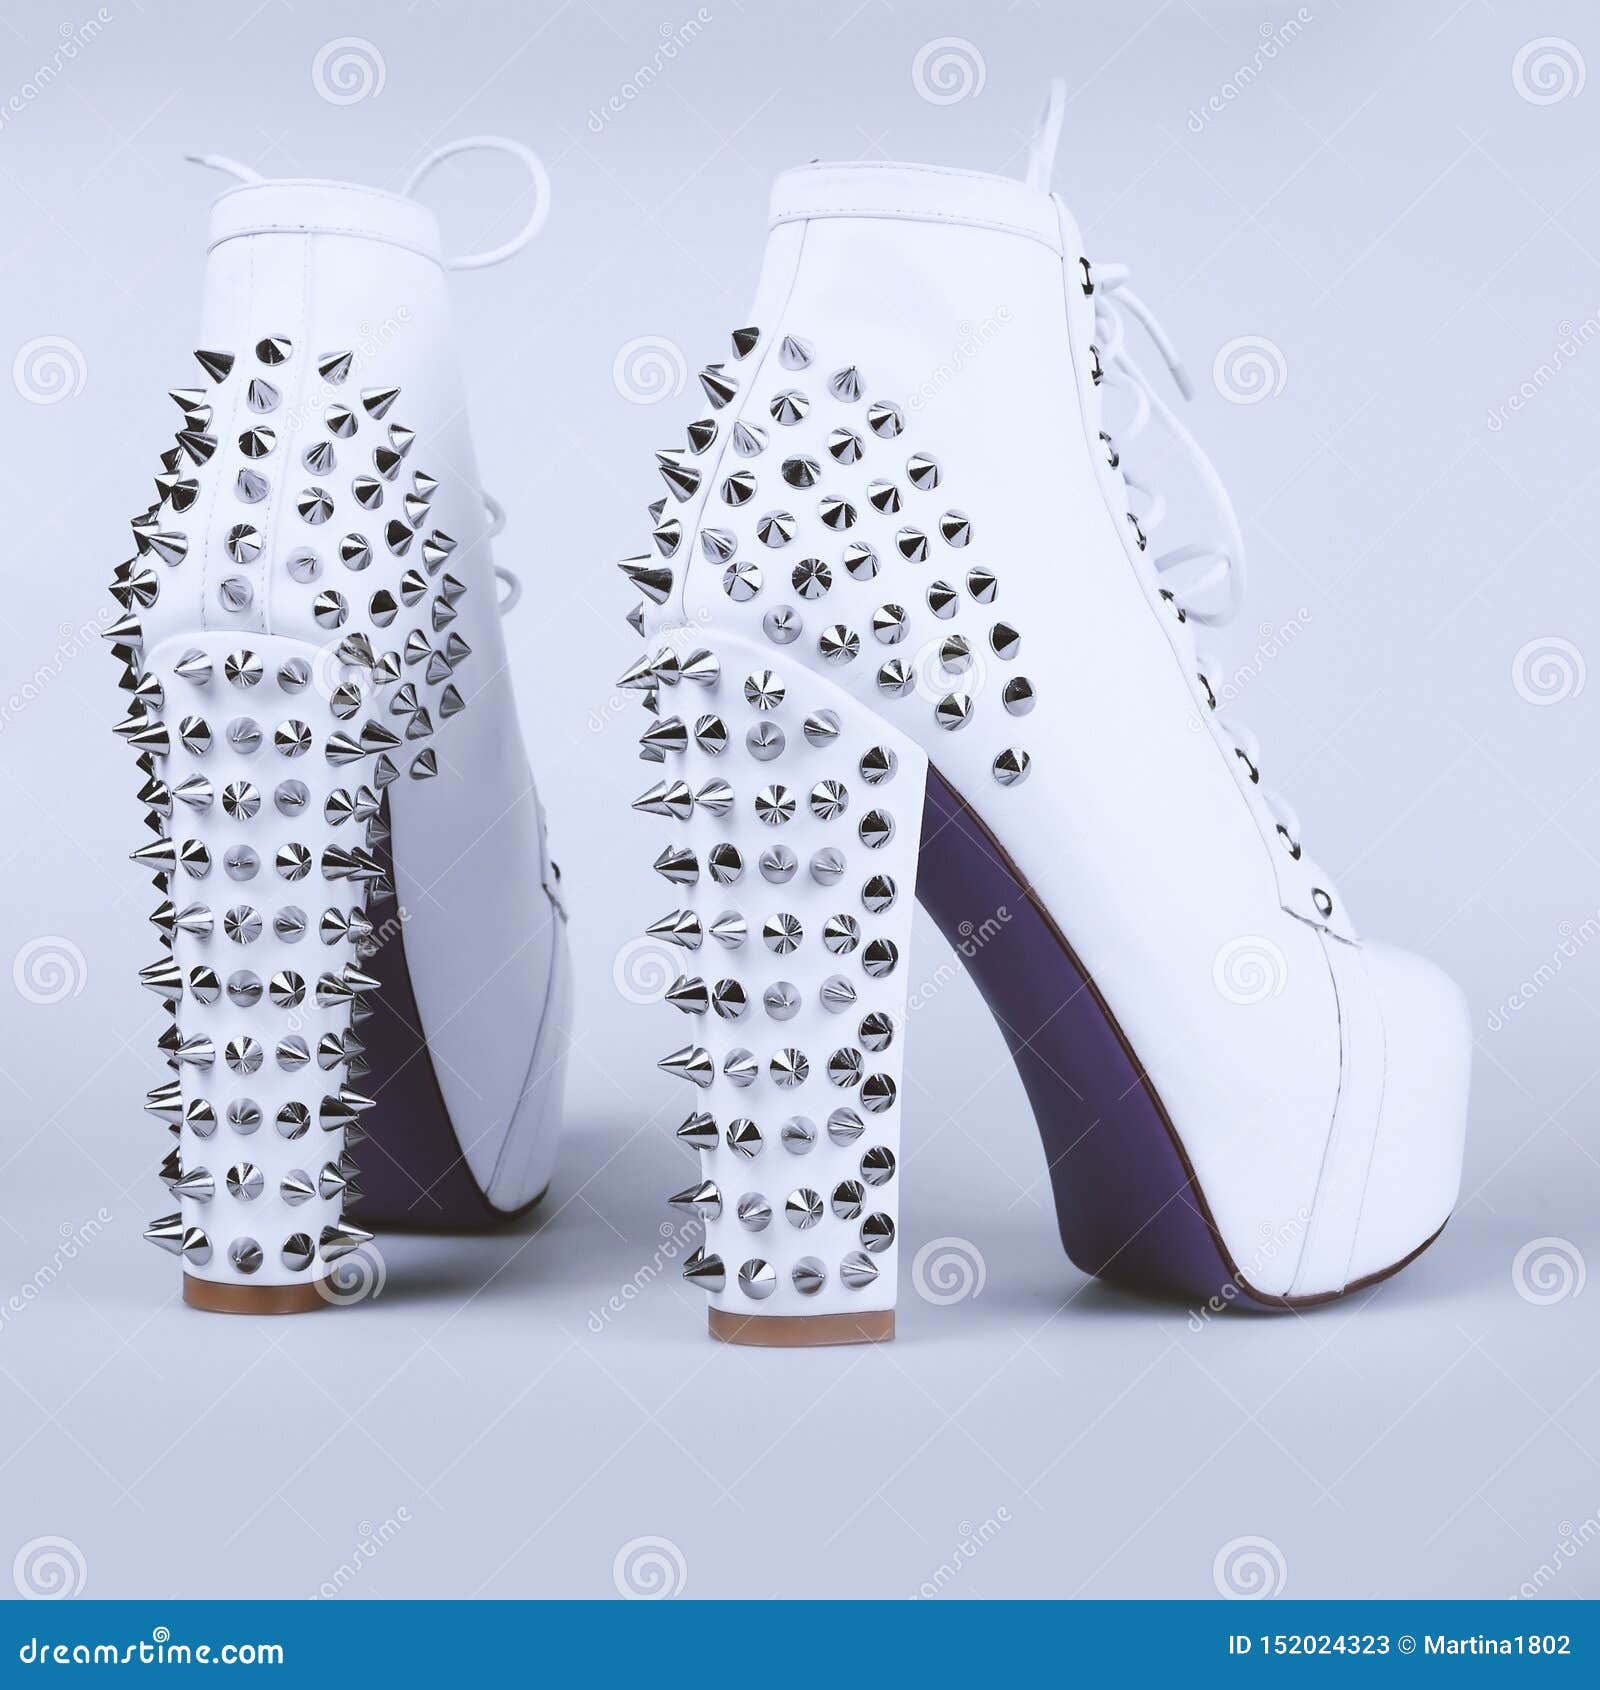 white spiked heels